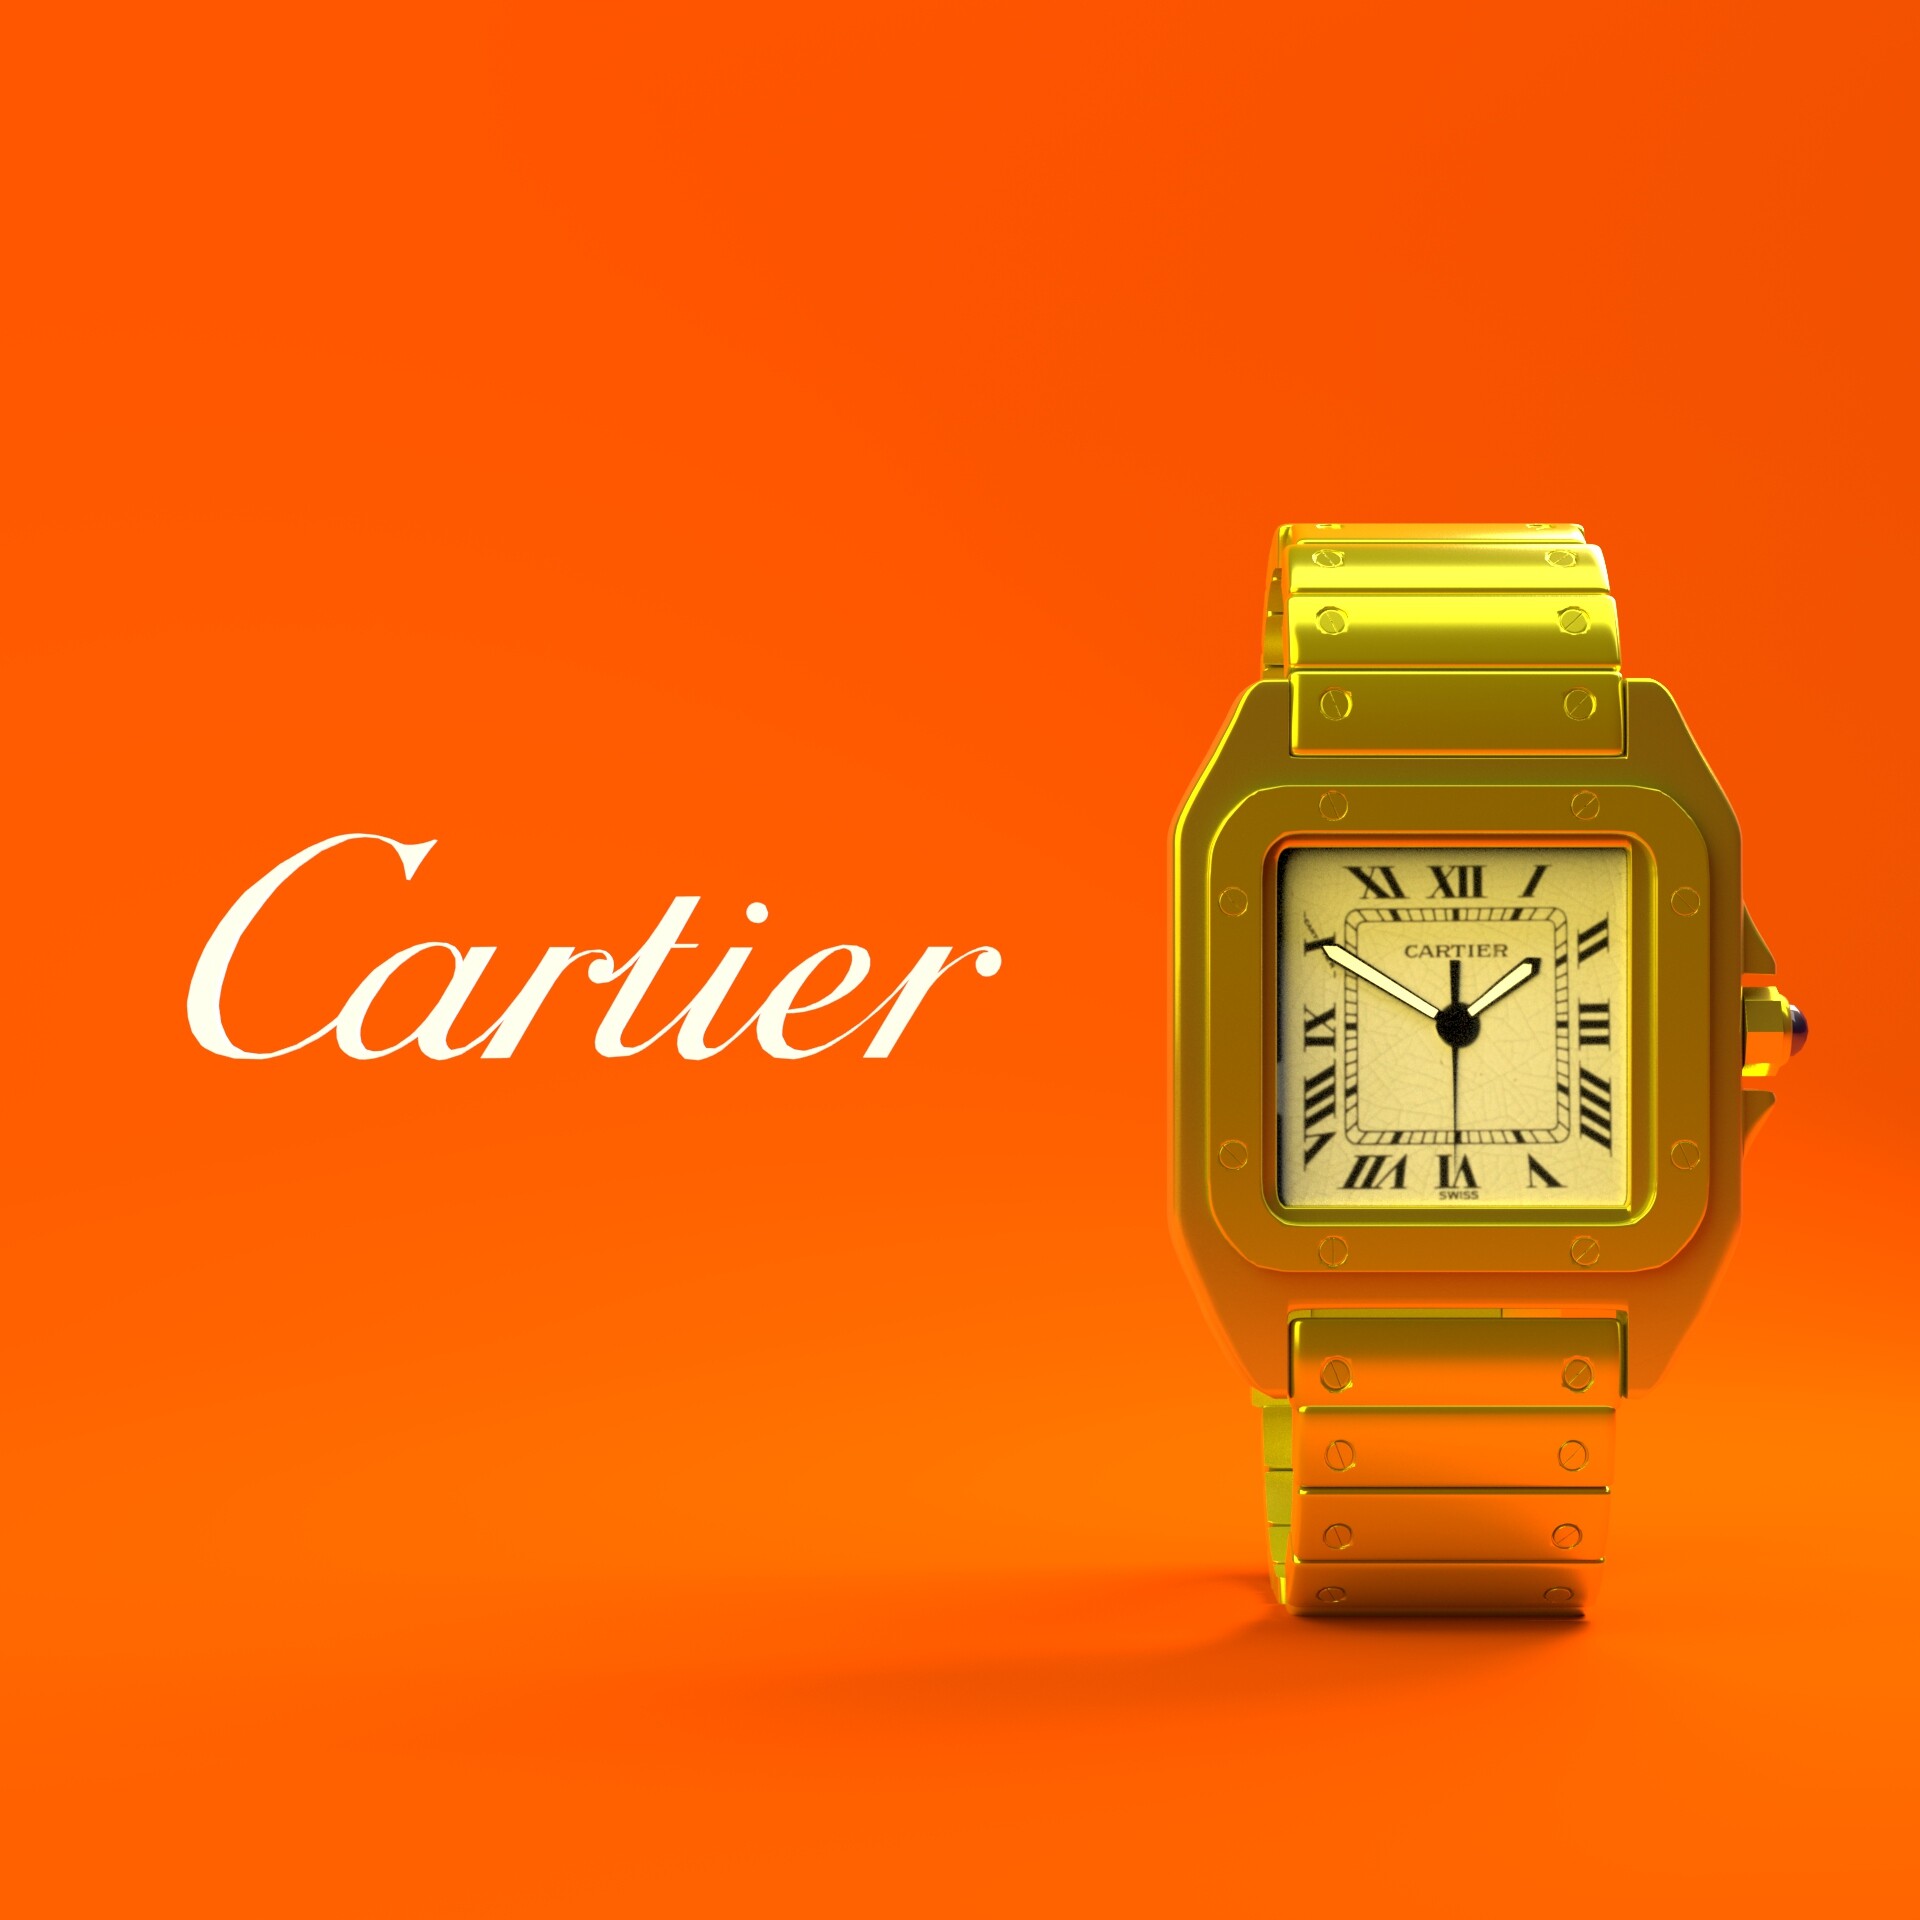 Costantino - The Cartier Santos Dupont in 24k gold (or something like that)